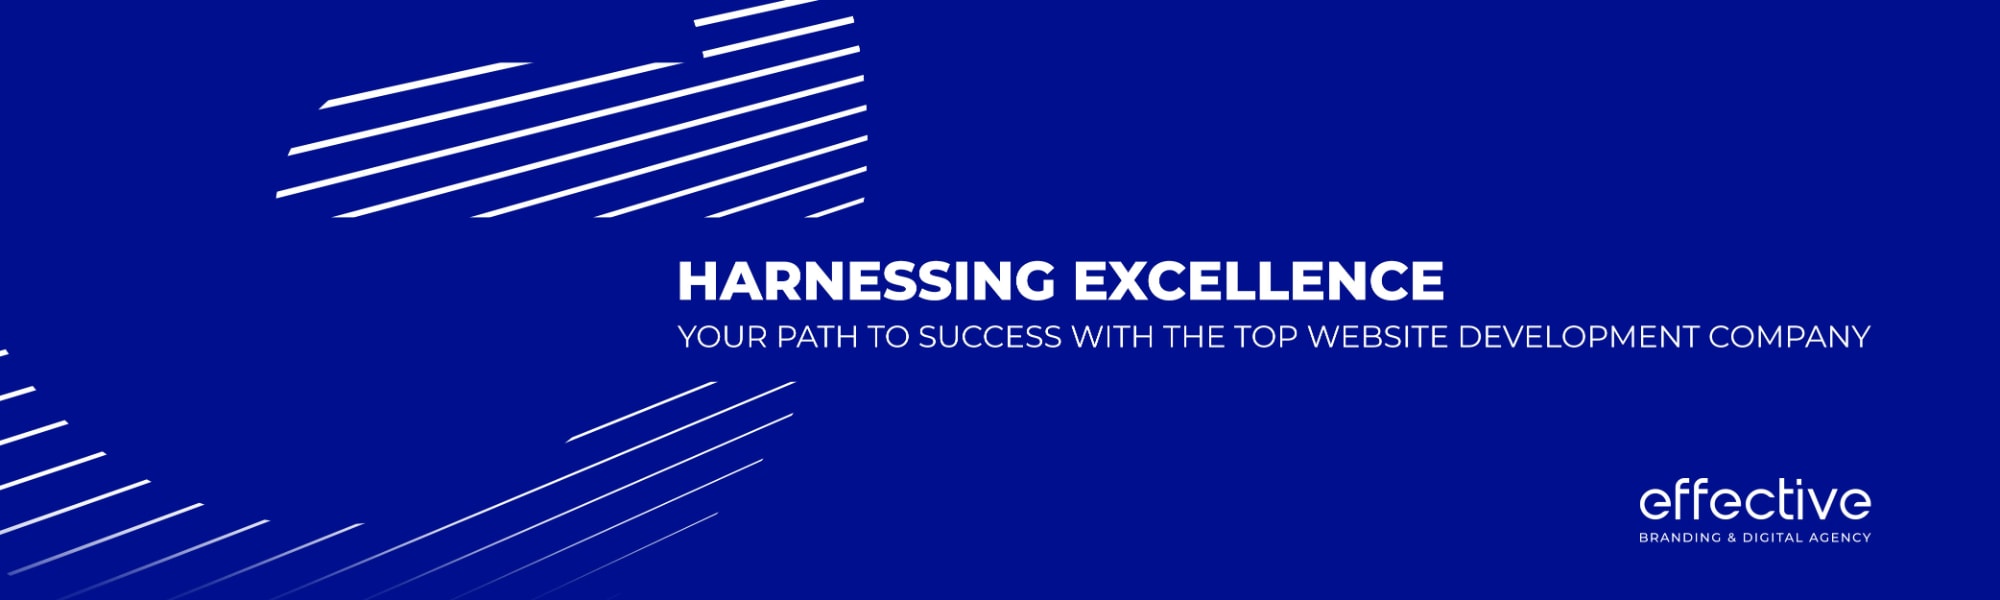 Harnessing Excellence Your Path to Success with the Top Website Development Company